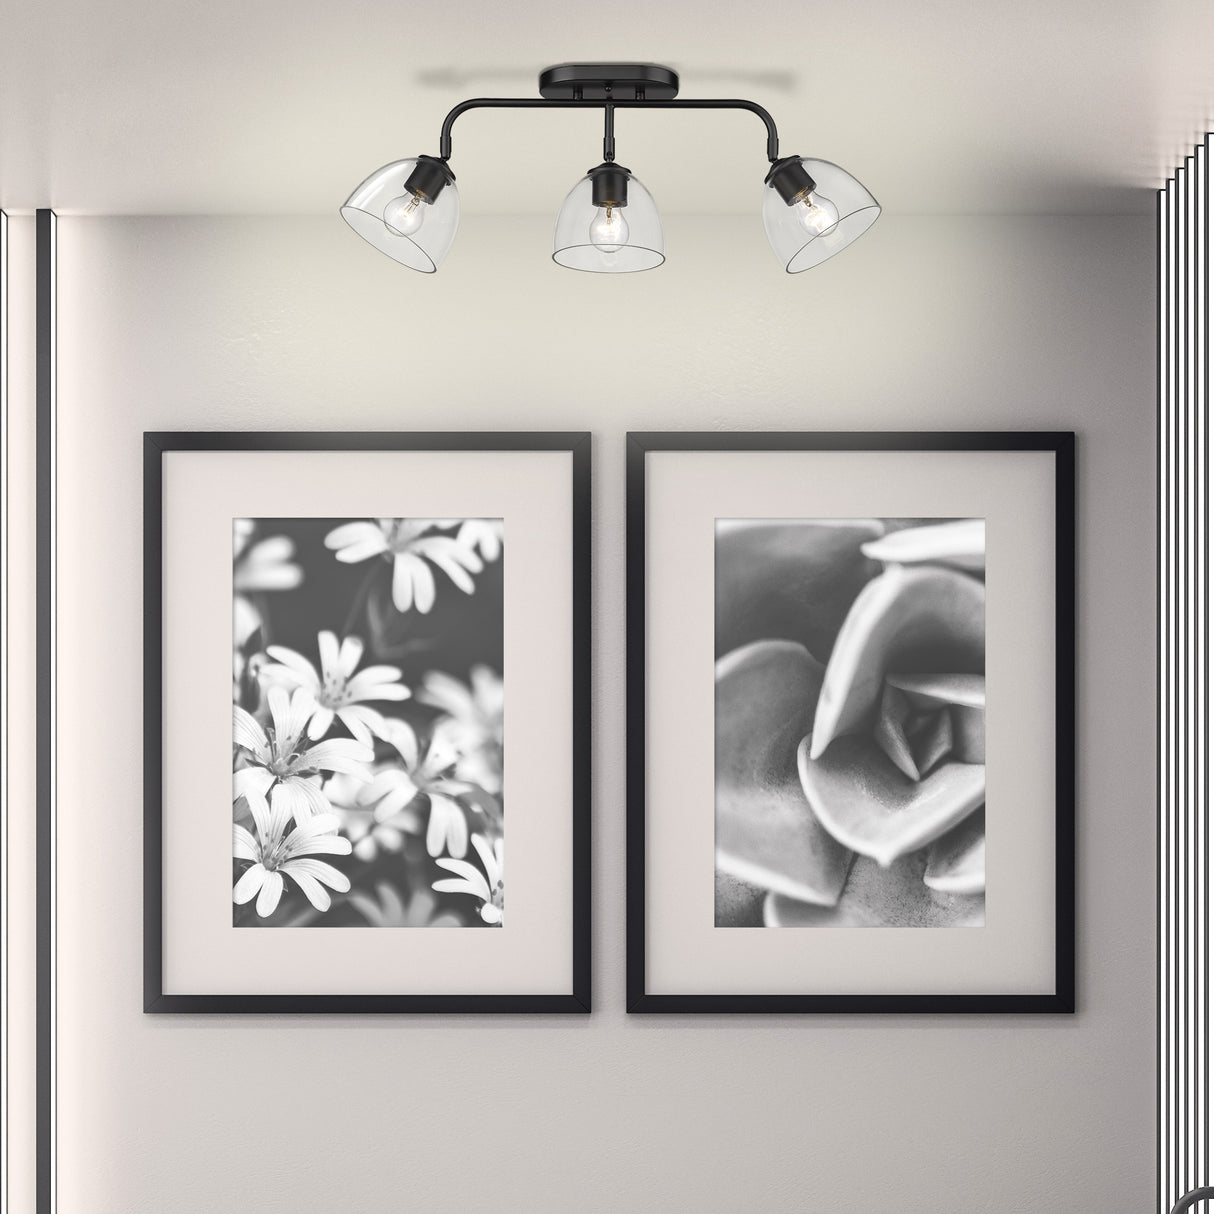 Roxie 3 Light Semi-Flush in Matte Black with Matte Black Accents and Clear Glass Shade